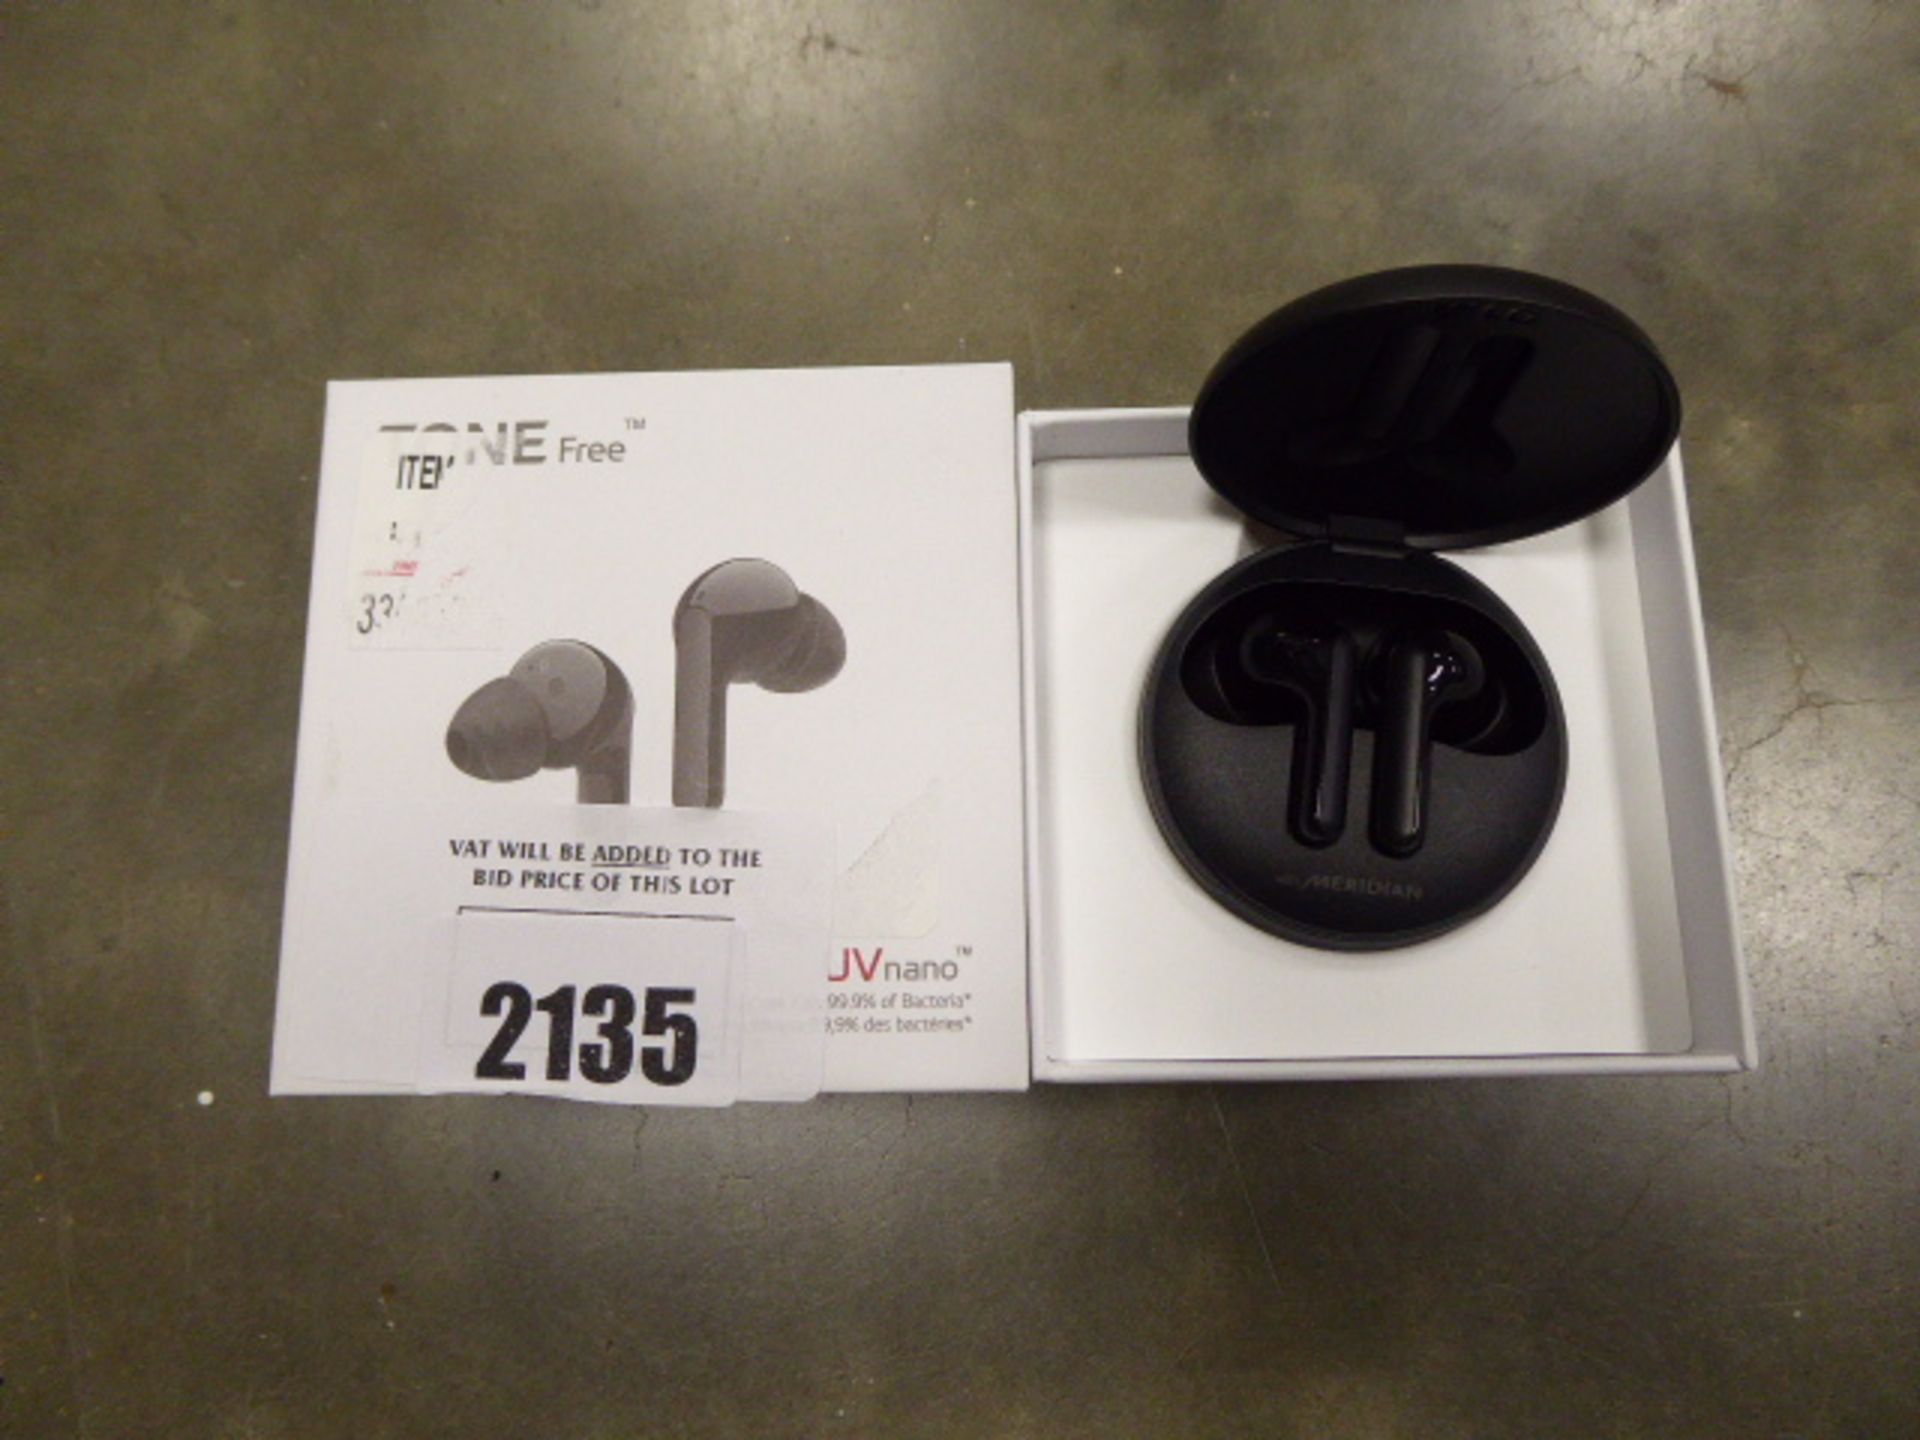 LG UV Nano tone free wireless earbuds with charging case and box